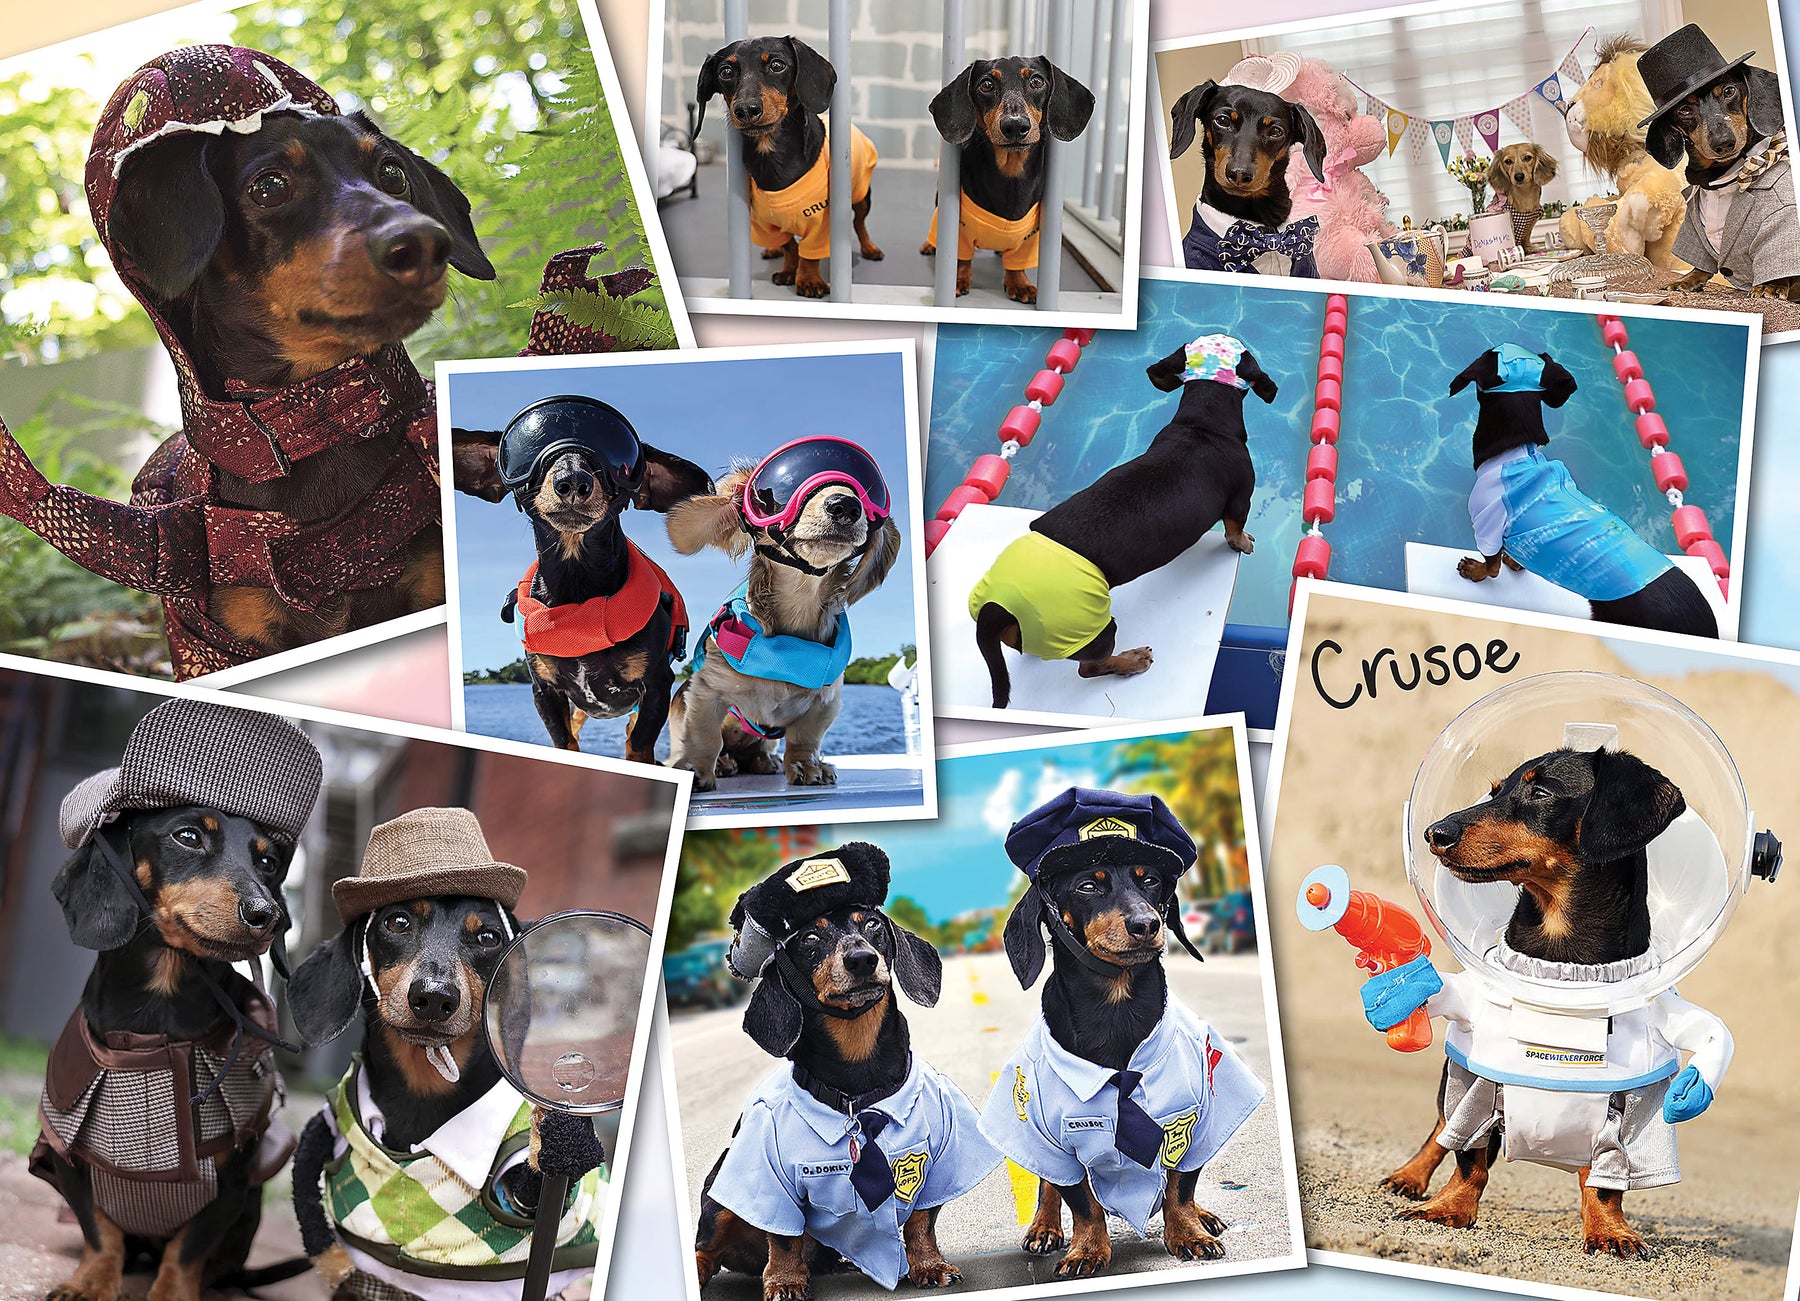 Puzzle Crusoe The Celebrity of Dachshunds - 1000 piece